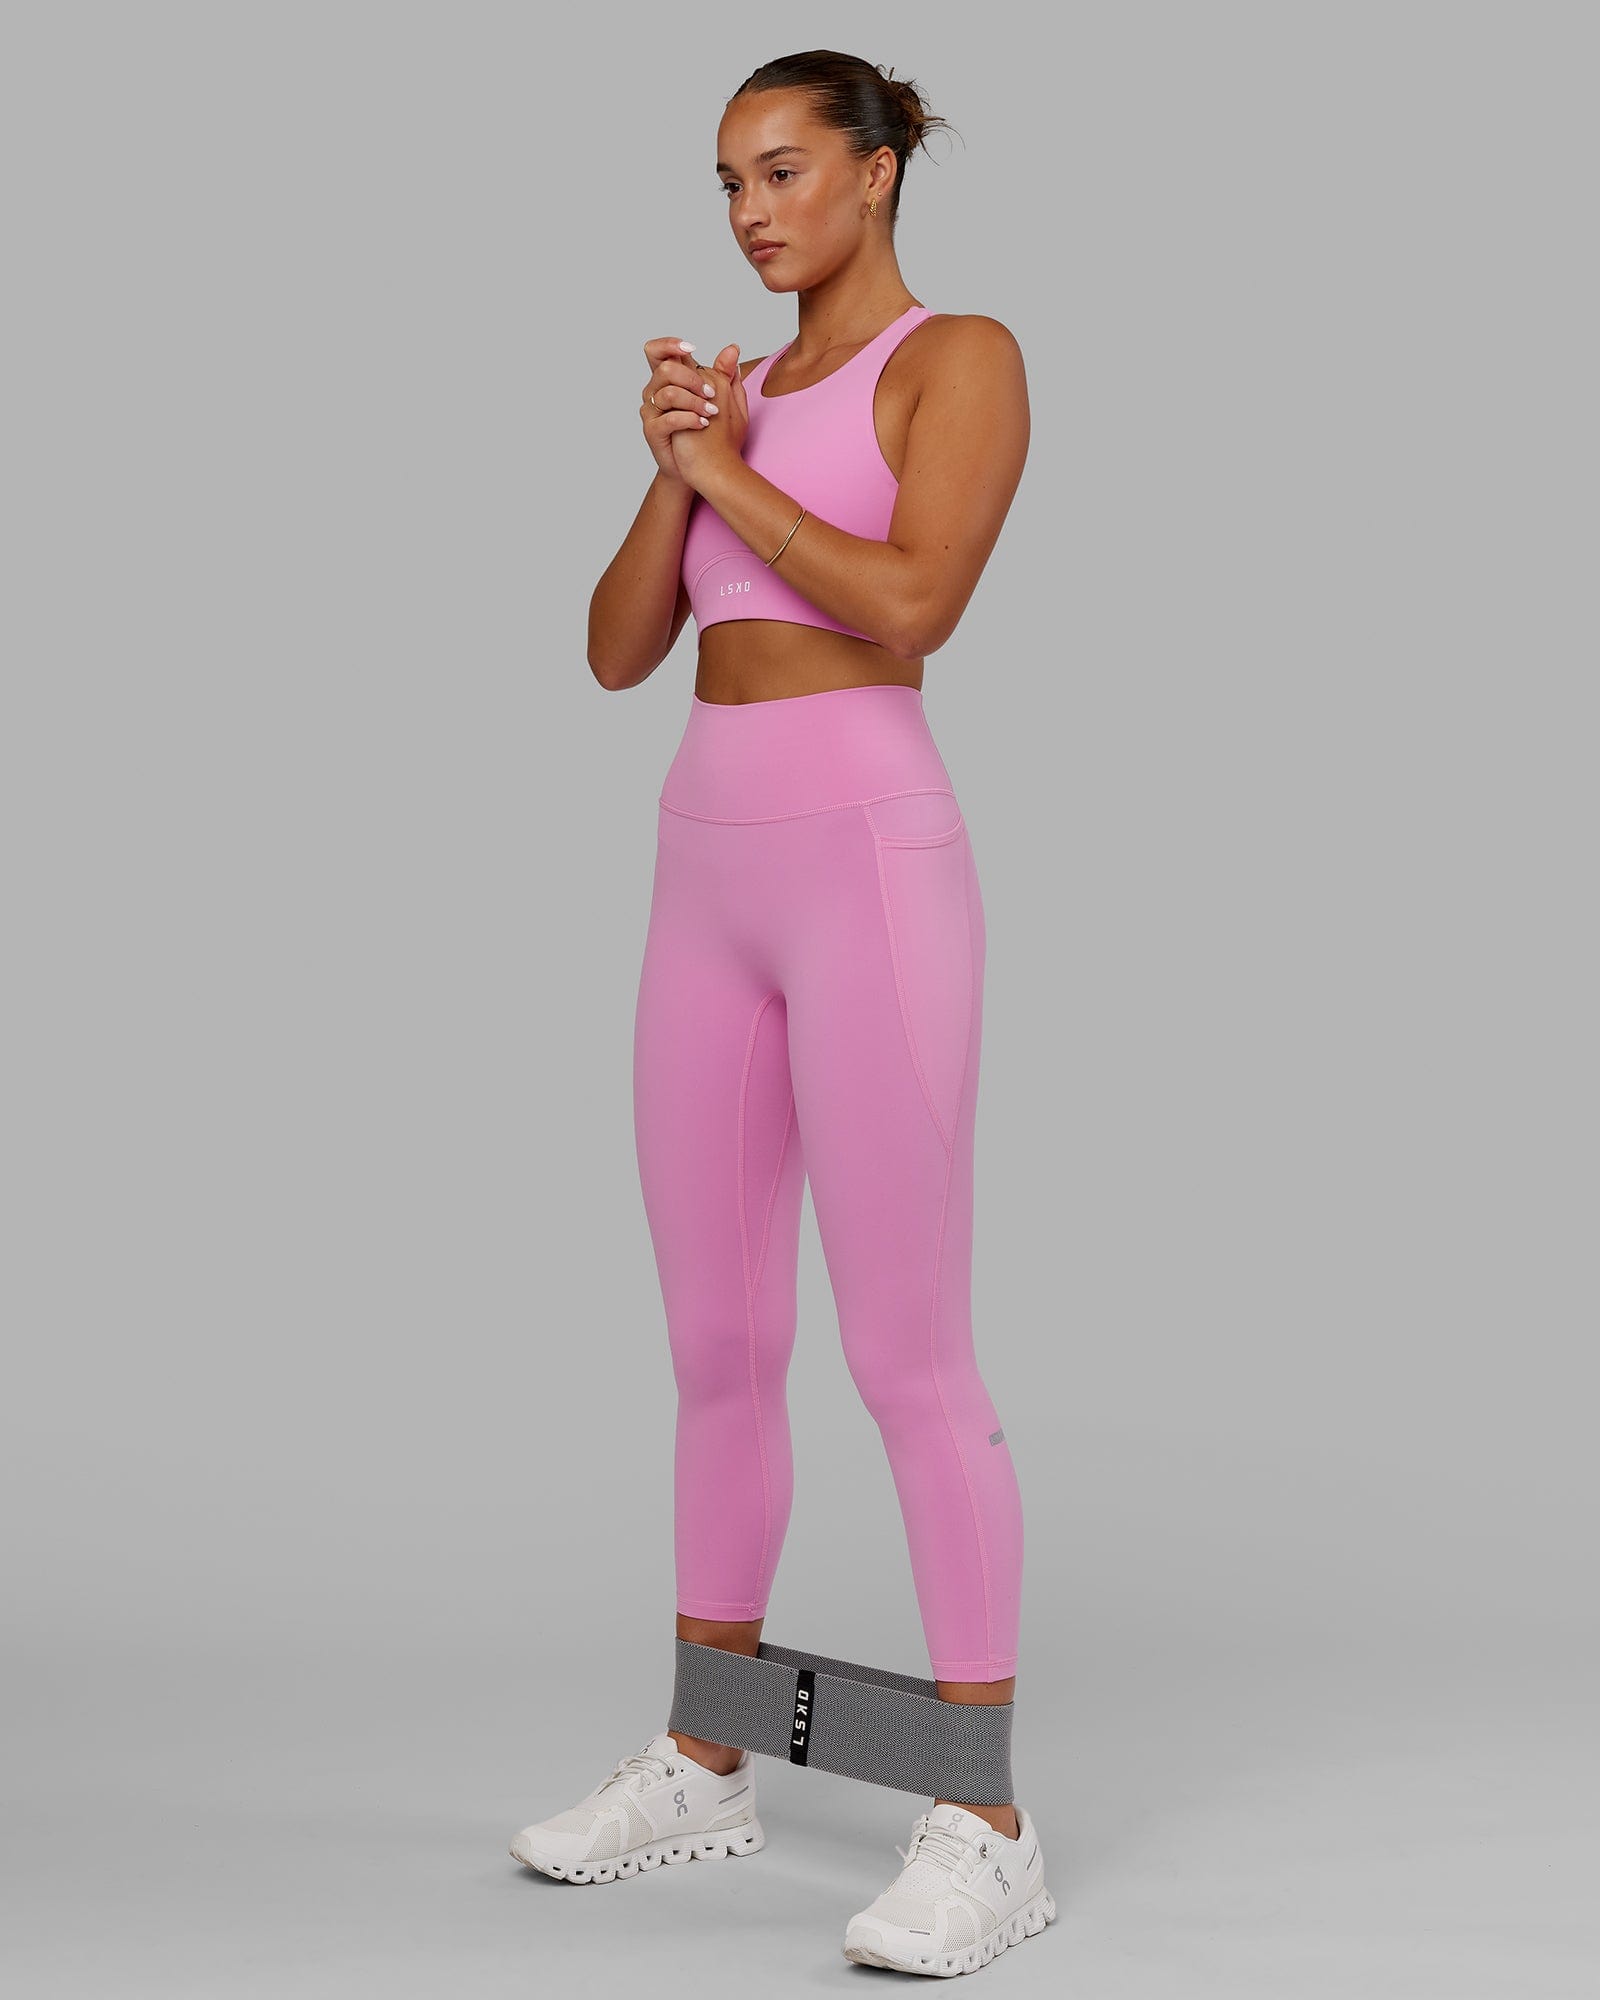 fusion 7 8 length tight spark pink 8